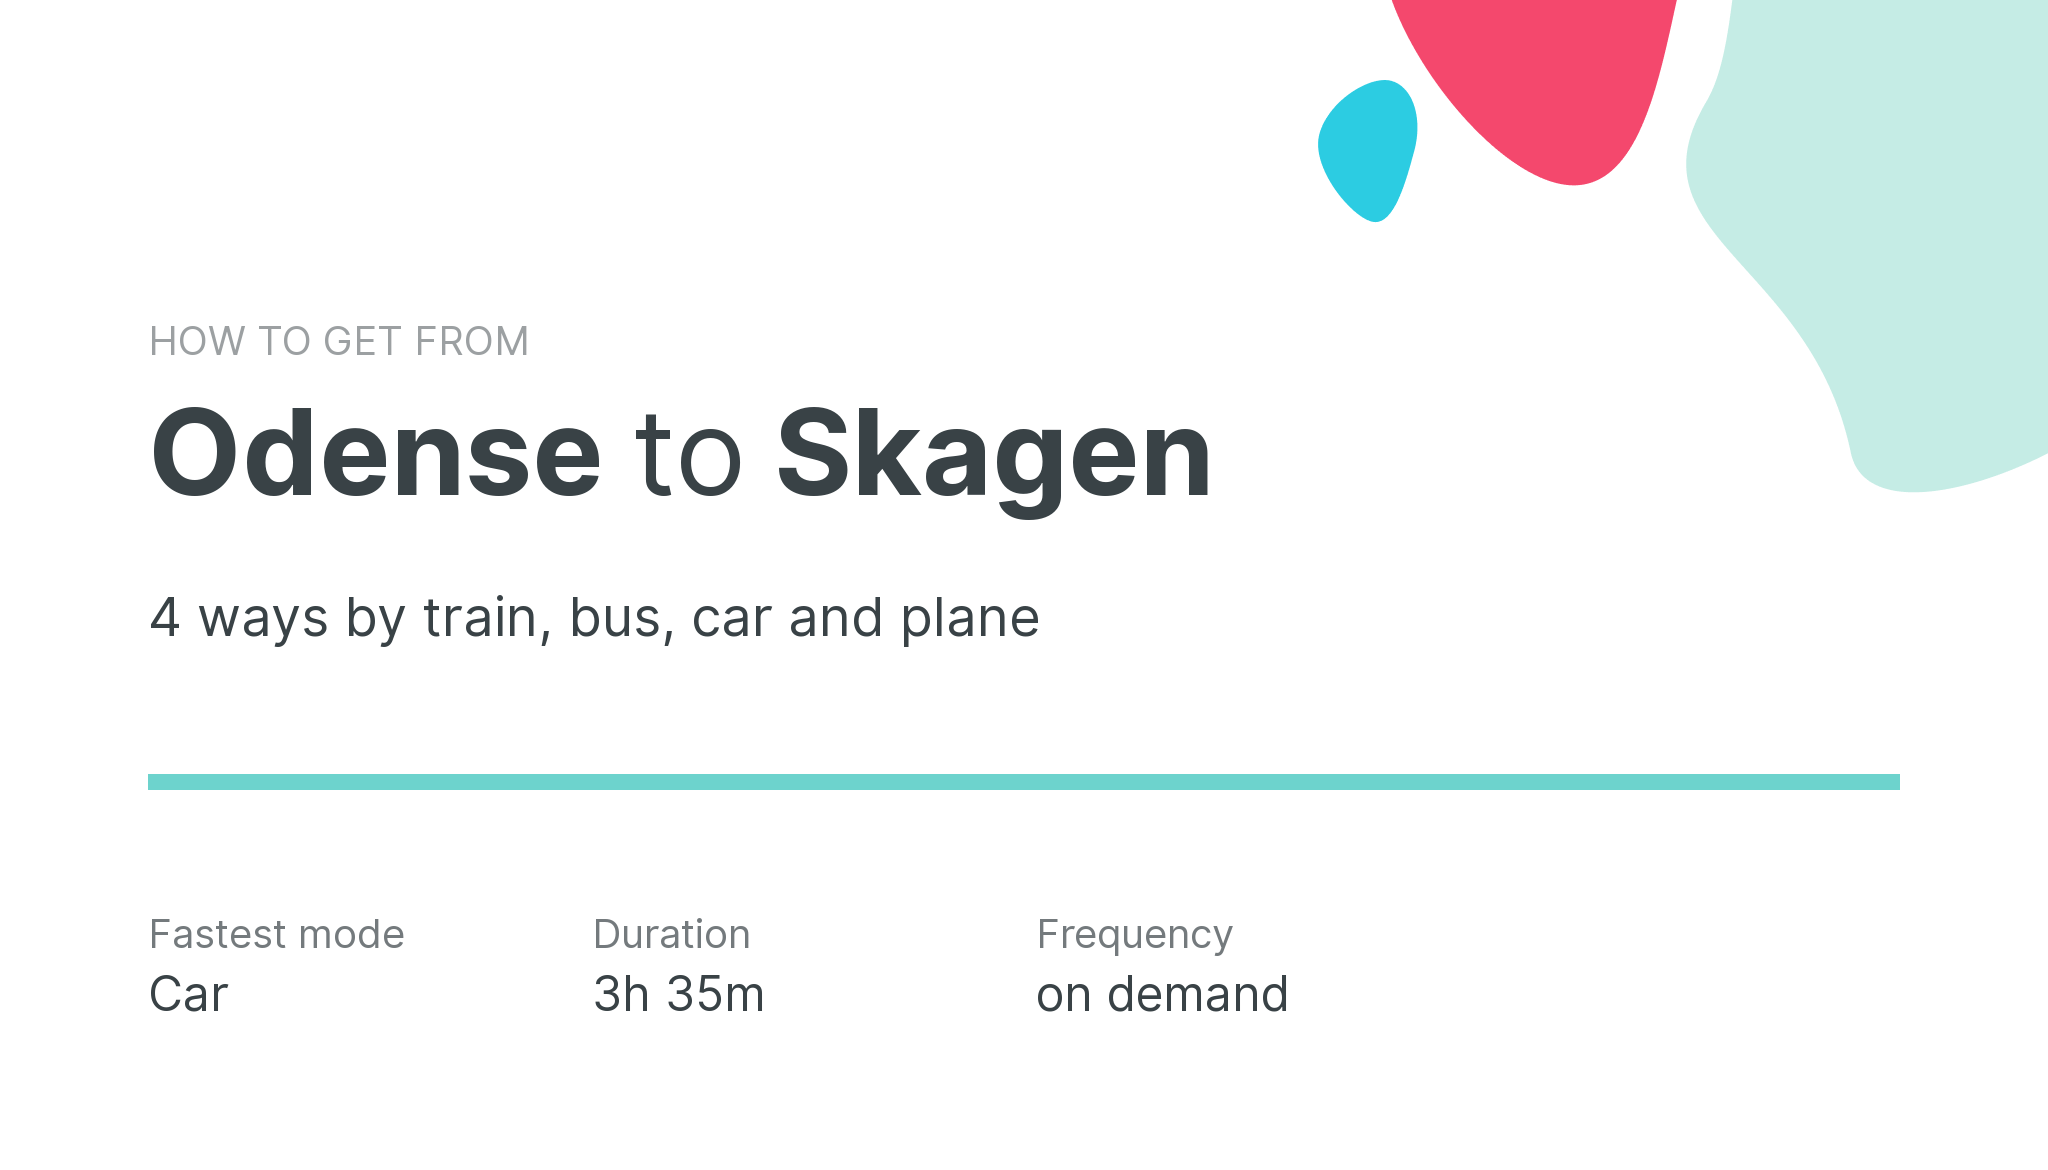 How do I get from Odense to Skagen